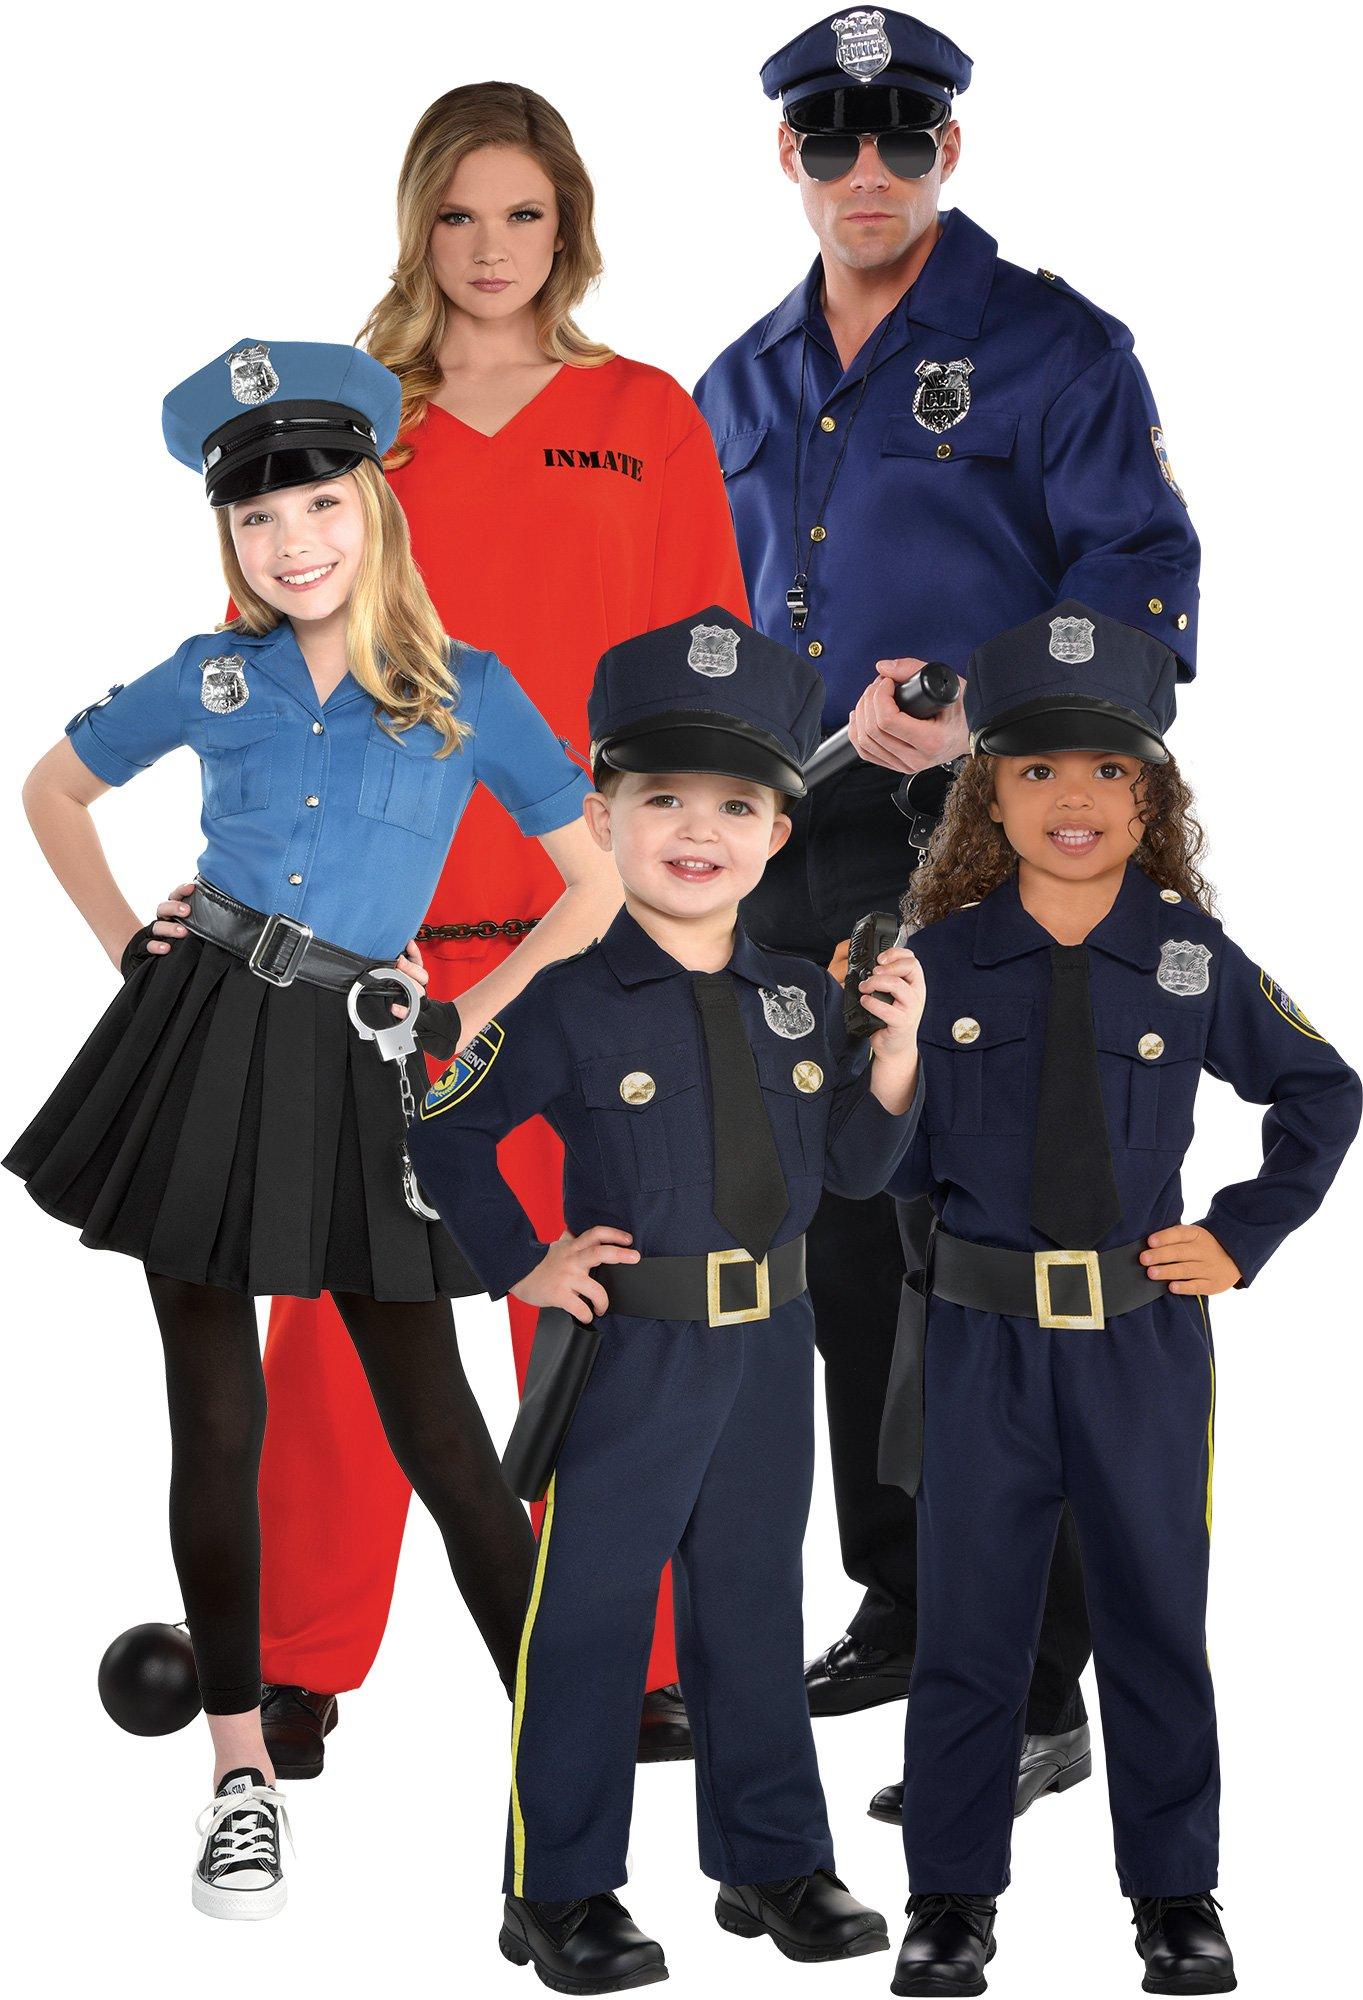  California Costumes mens Police Adult Sized Costume